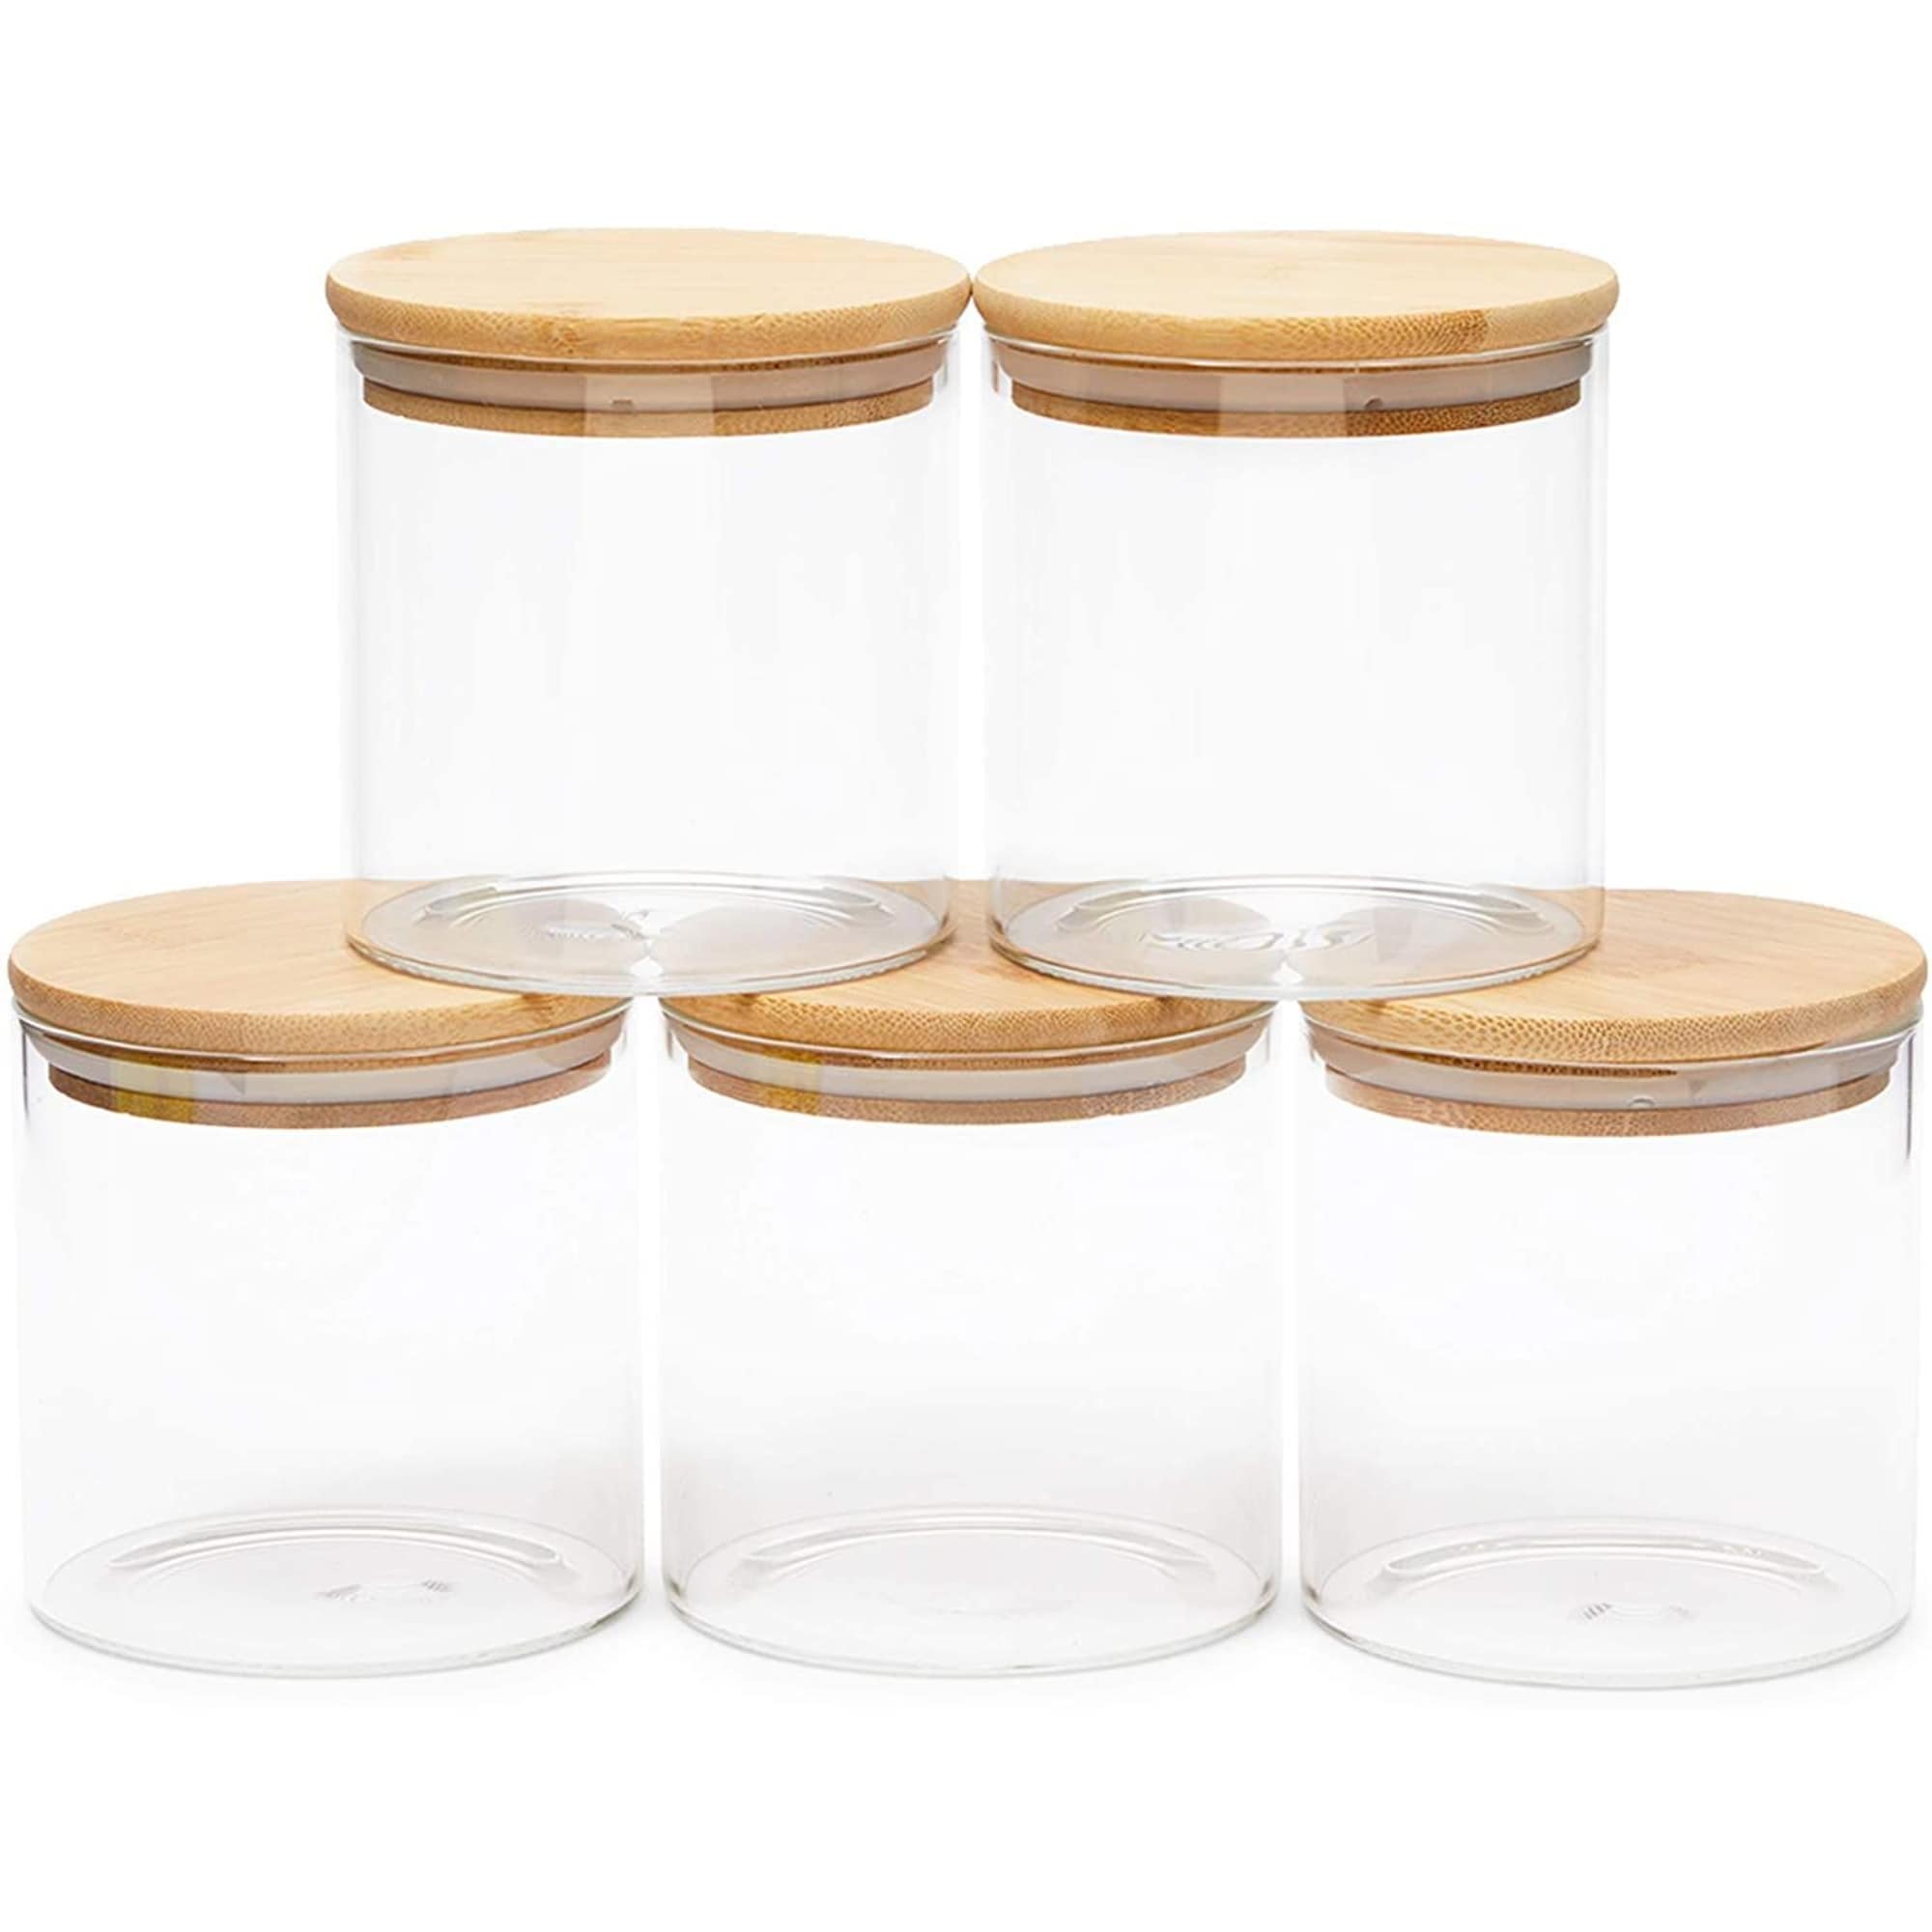 https://ak1.ostkcdn.com/images/products/is/images/direct/9bae9cfa055323f474c06600b0c01ca10c047d29/Glass-Canisters-with-Airtight-Bamboo-Lids-for-Pantry-Storage-%284-x-4.13-In%2C-5-Pack%29.jpg